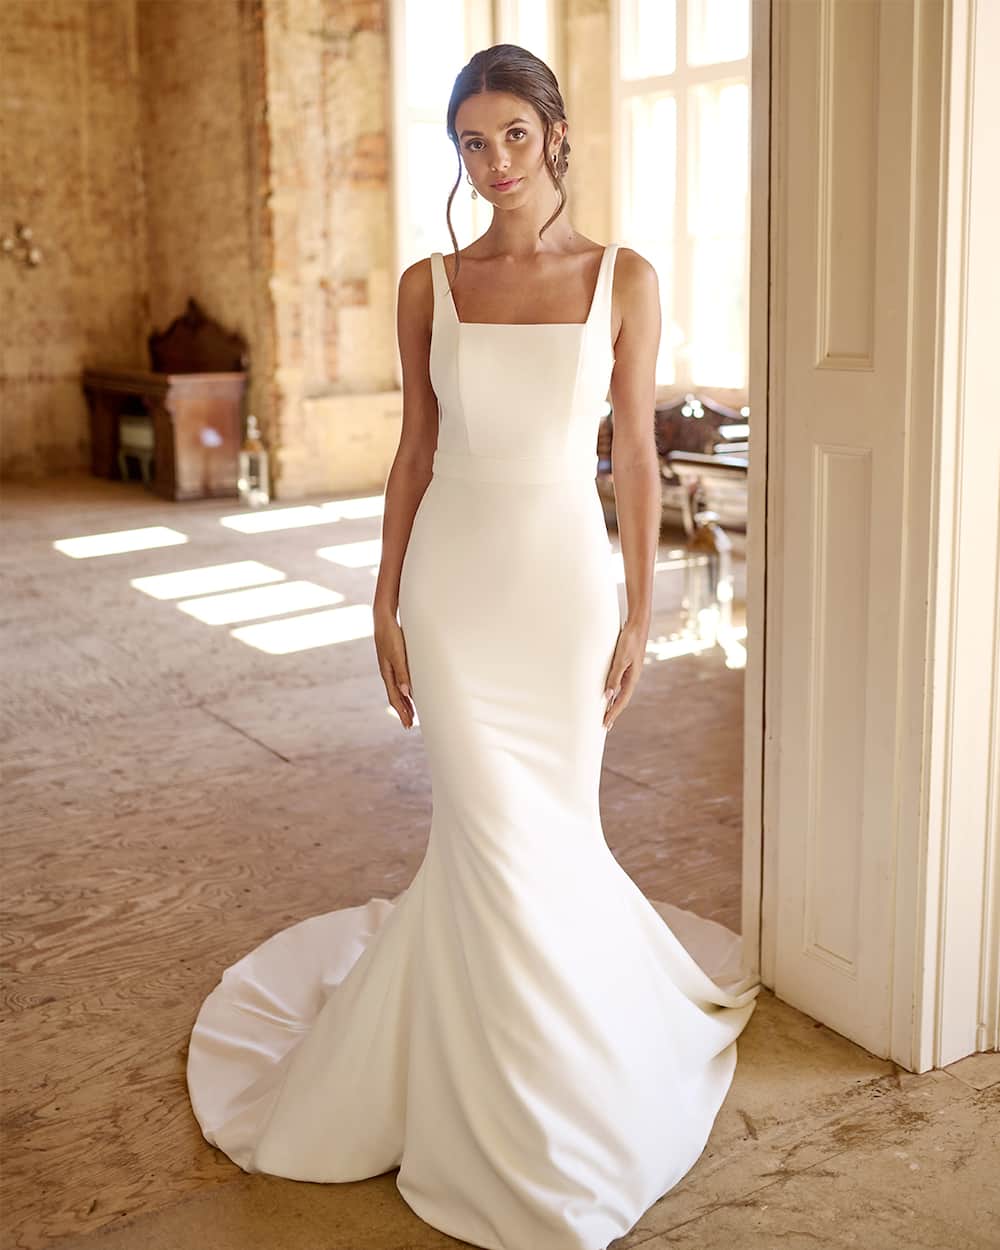 Crepe material styles for wedding dress